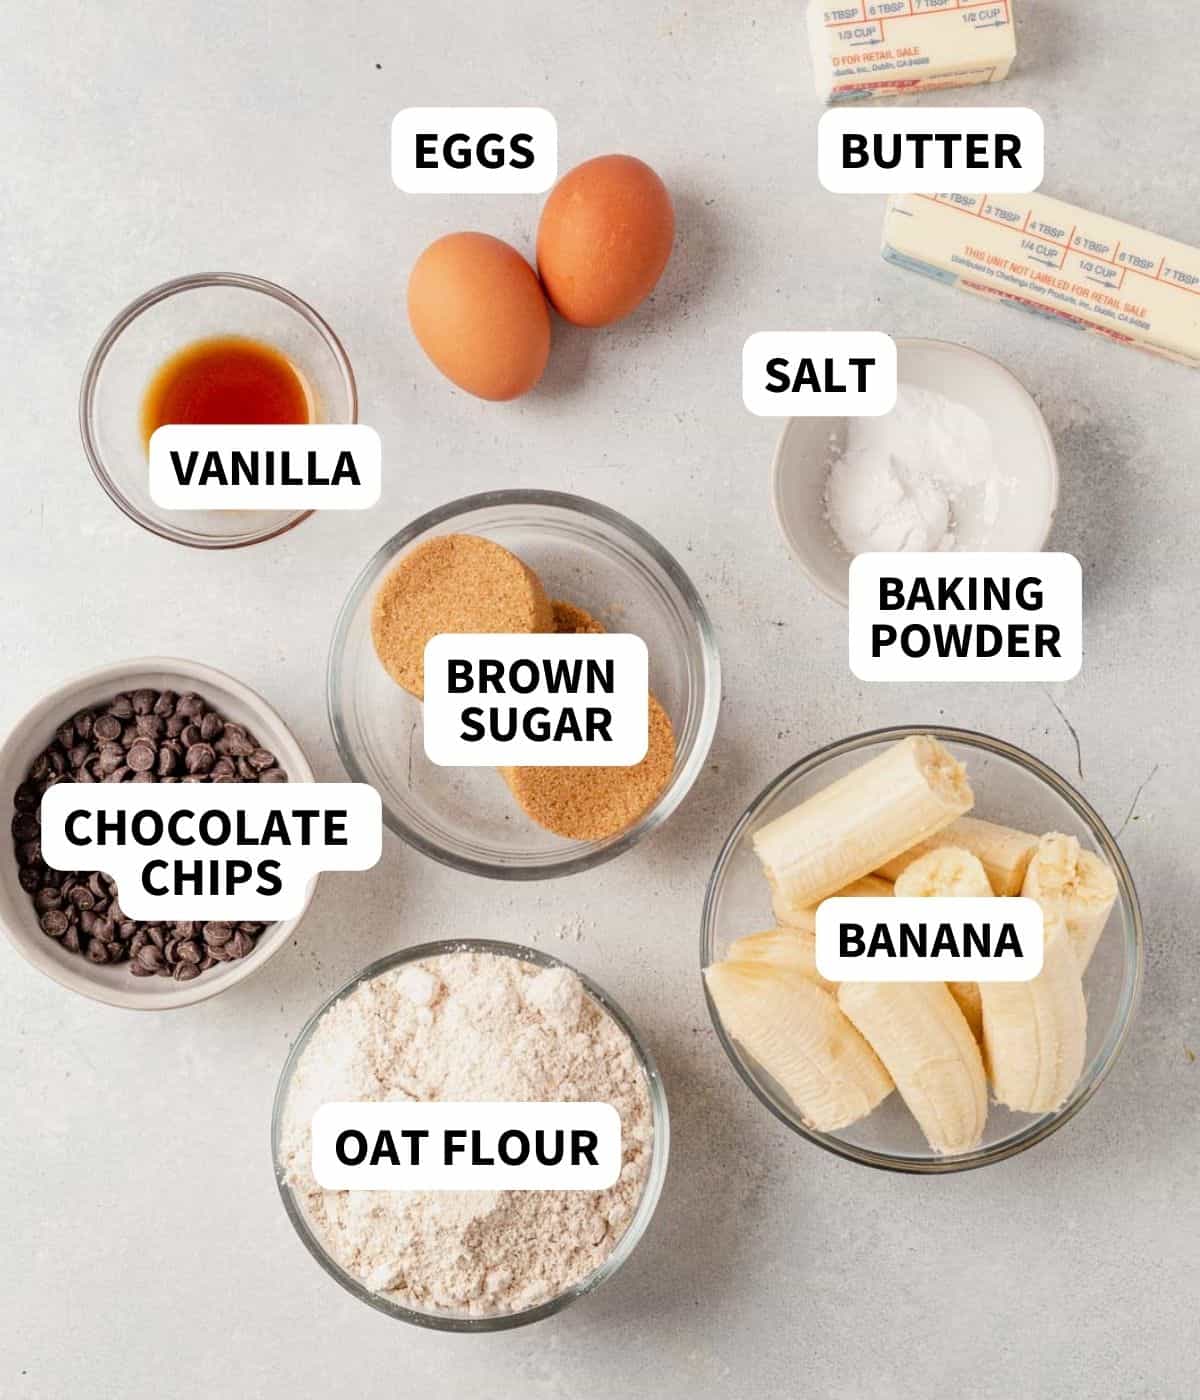 oat flour banana bread ingredients on a counteretop